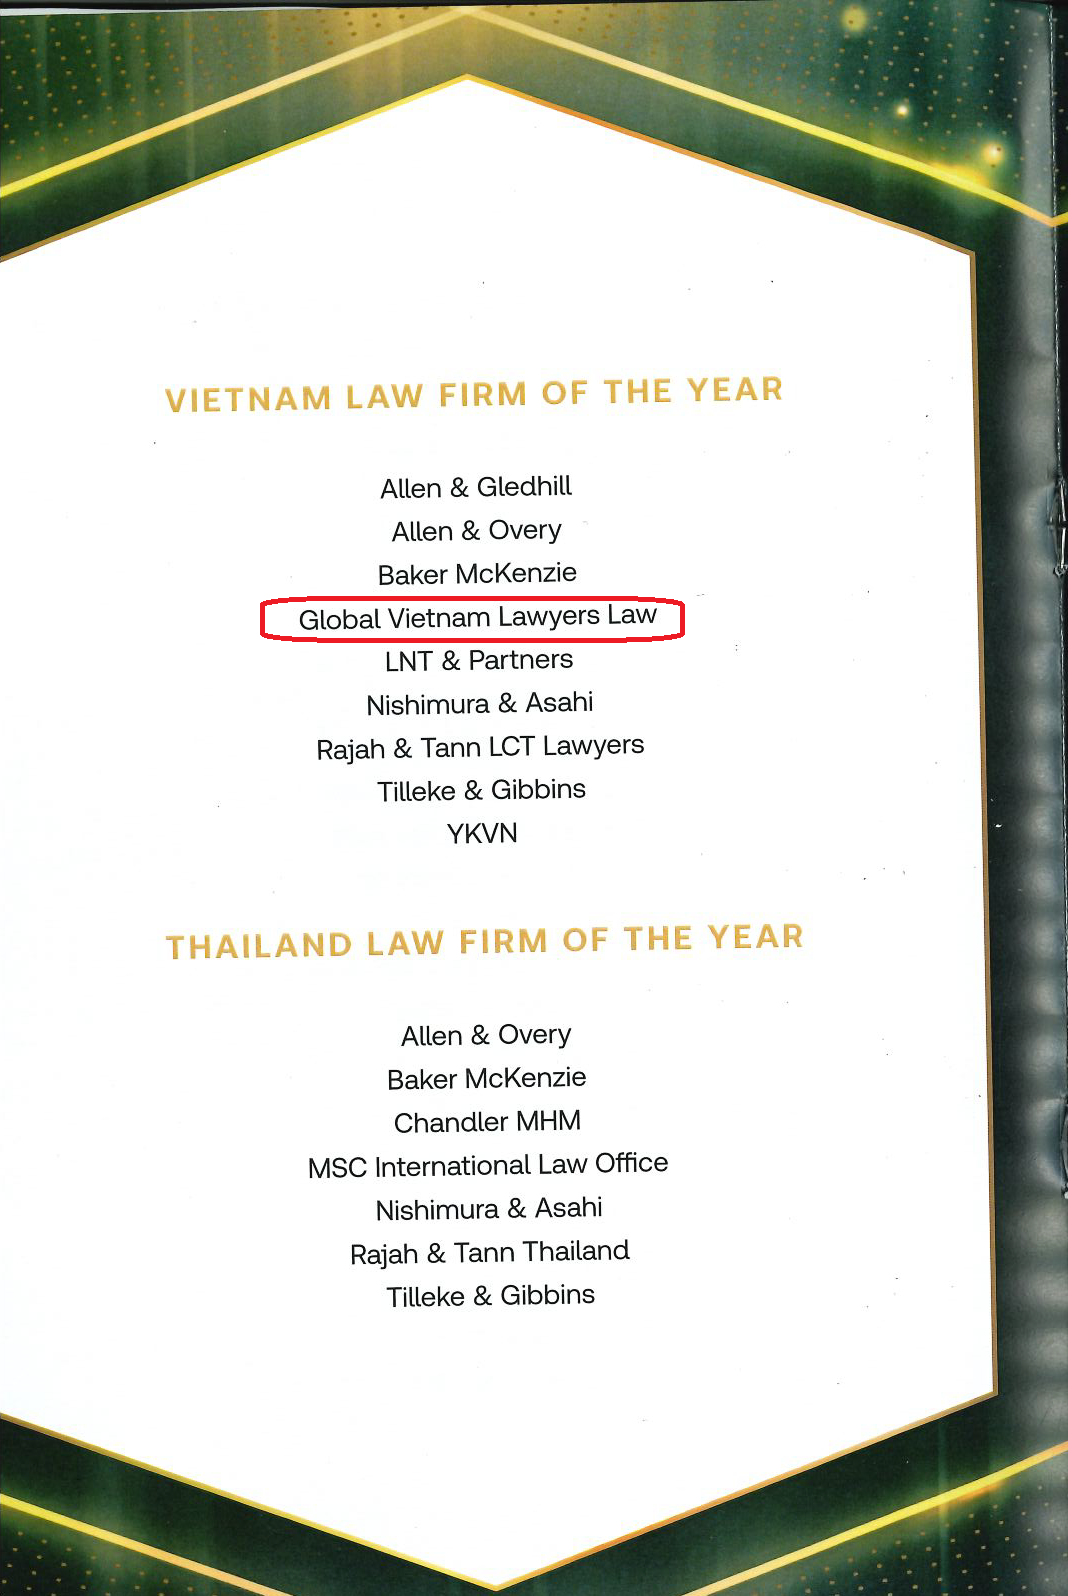 Vietnam Law Firm of The Year